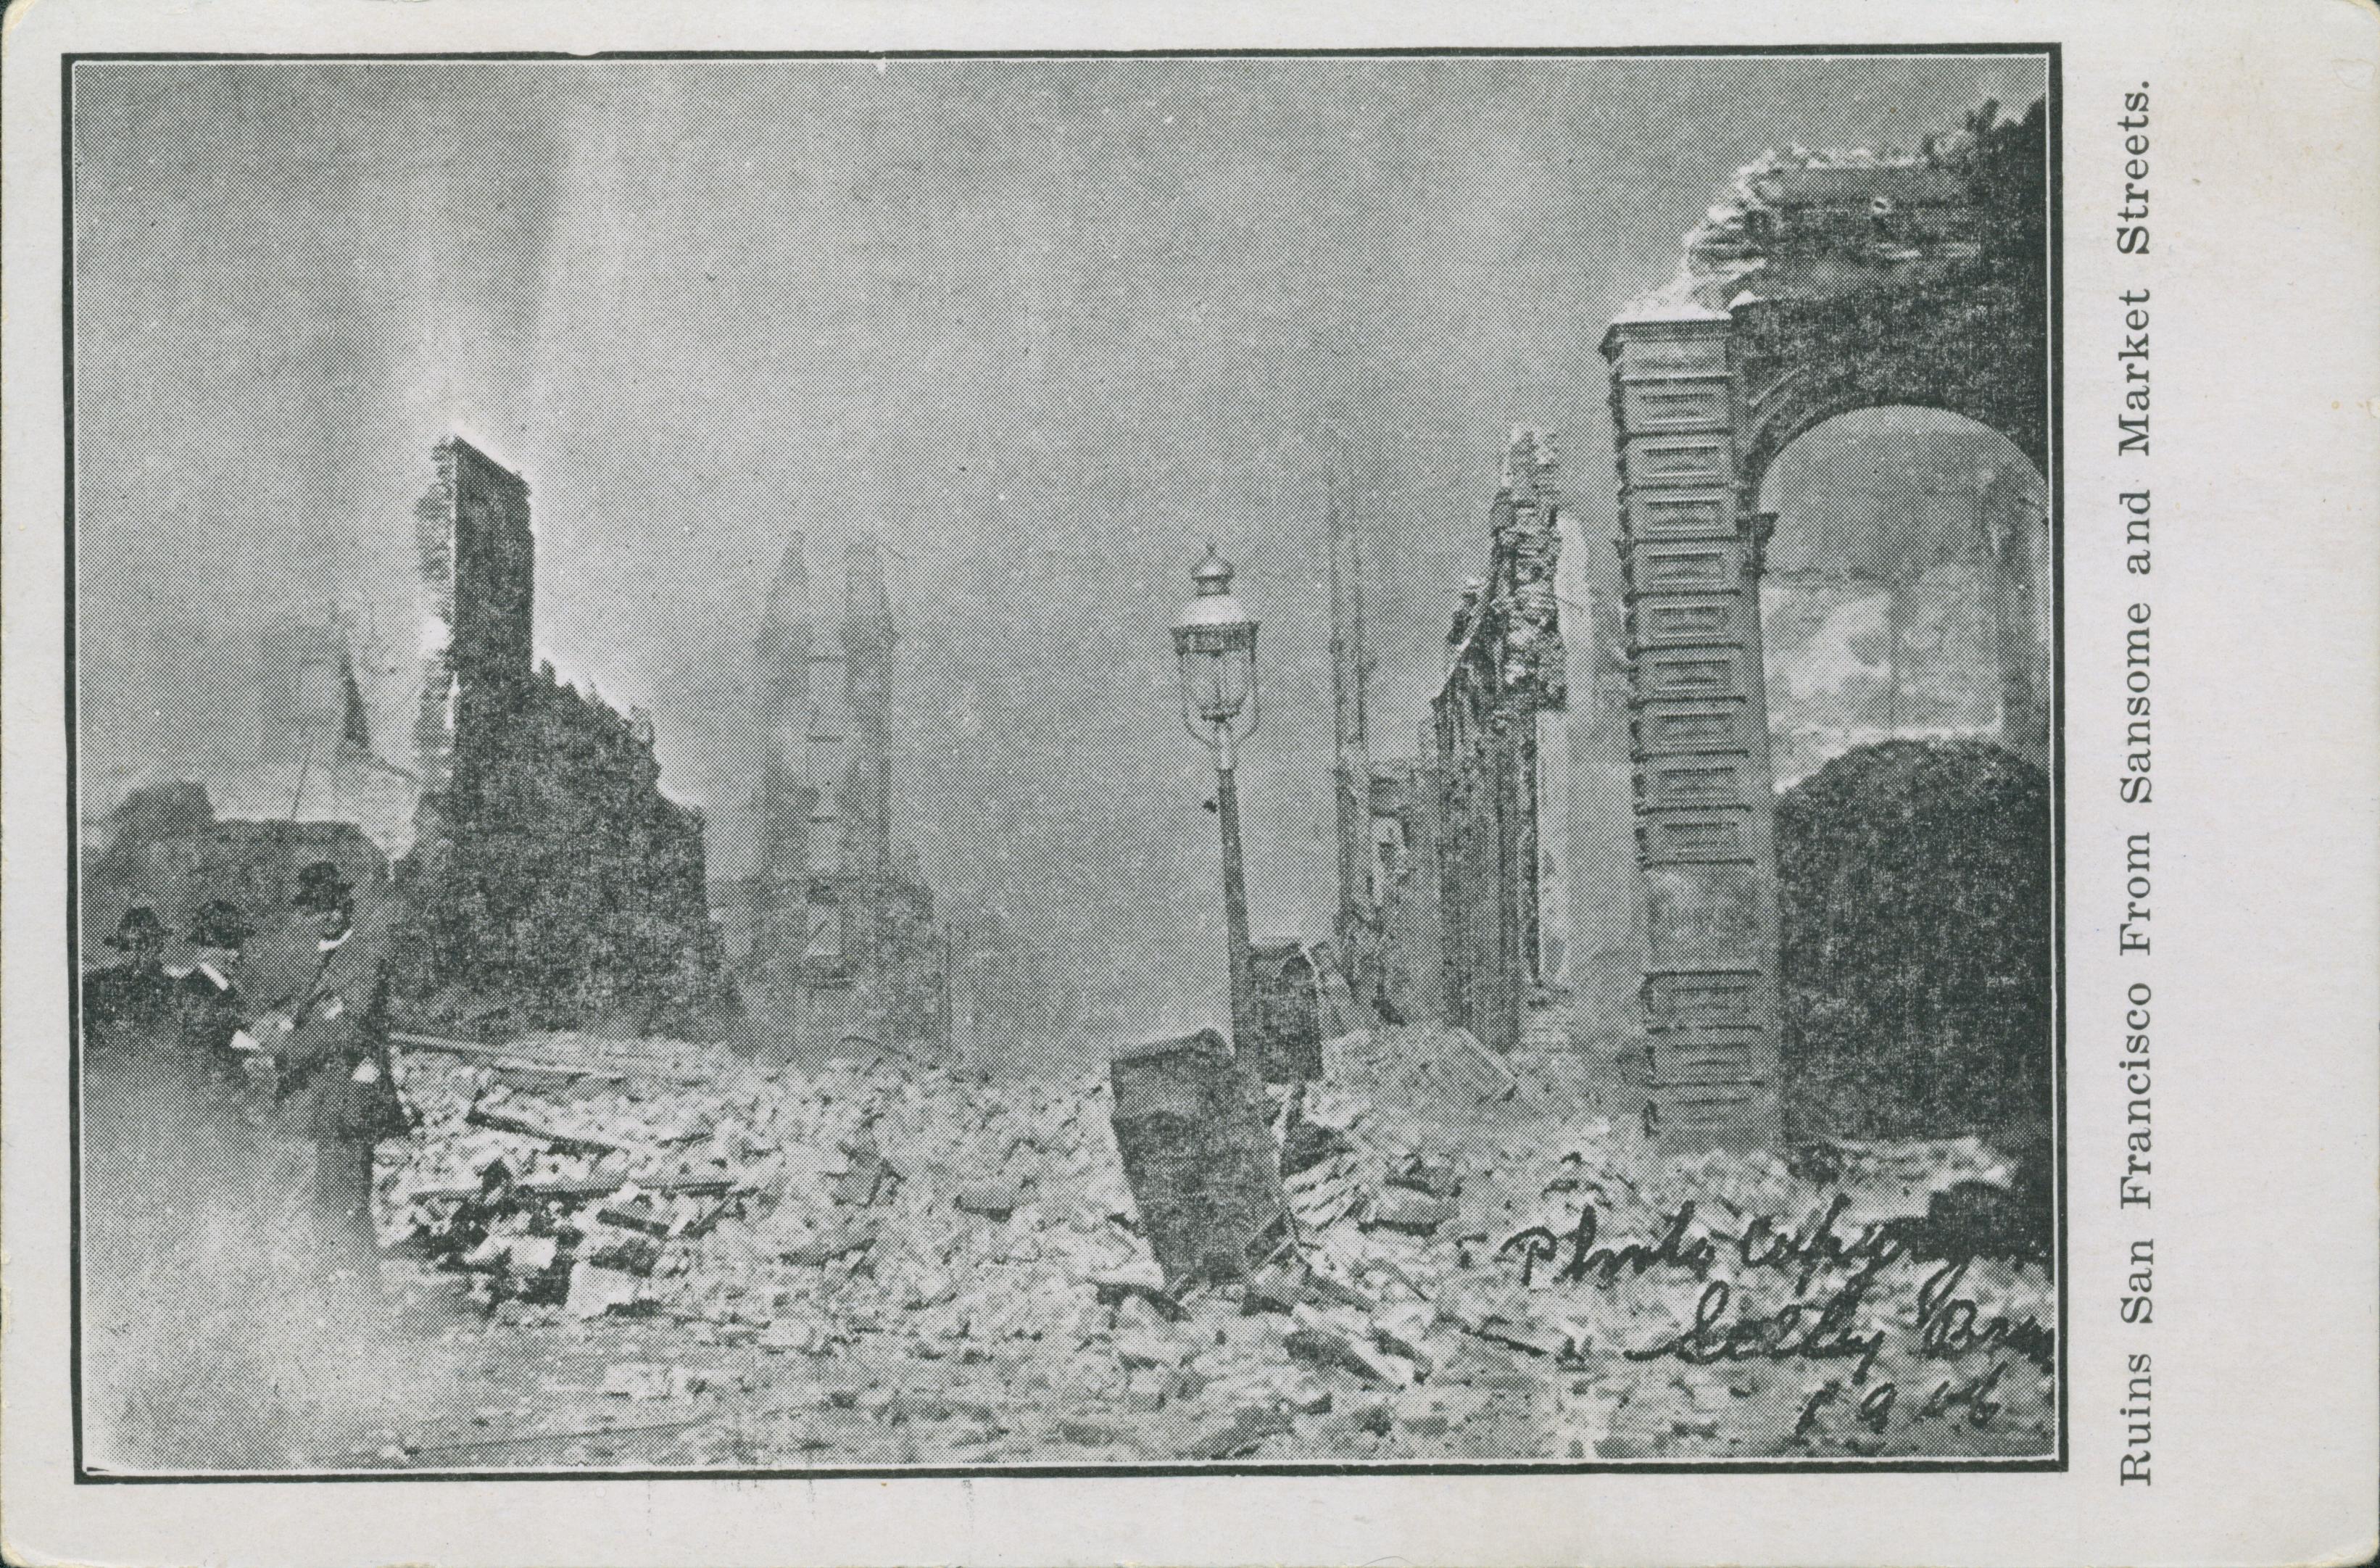 Shows three men standing among piles of rubble and surrounded by ruined buildings.